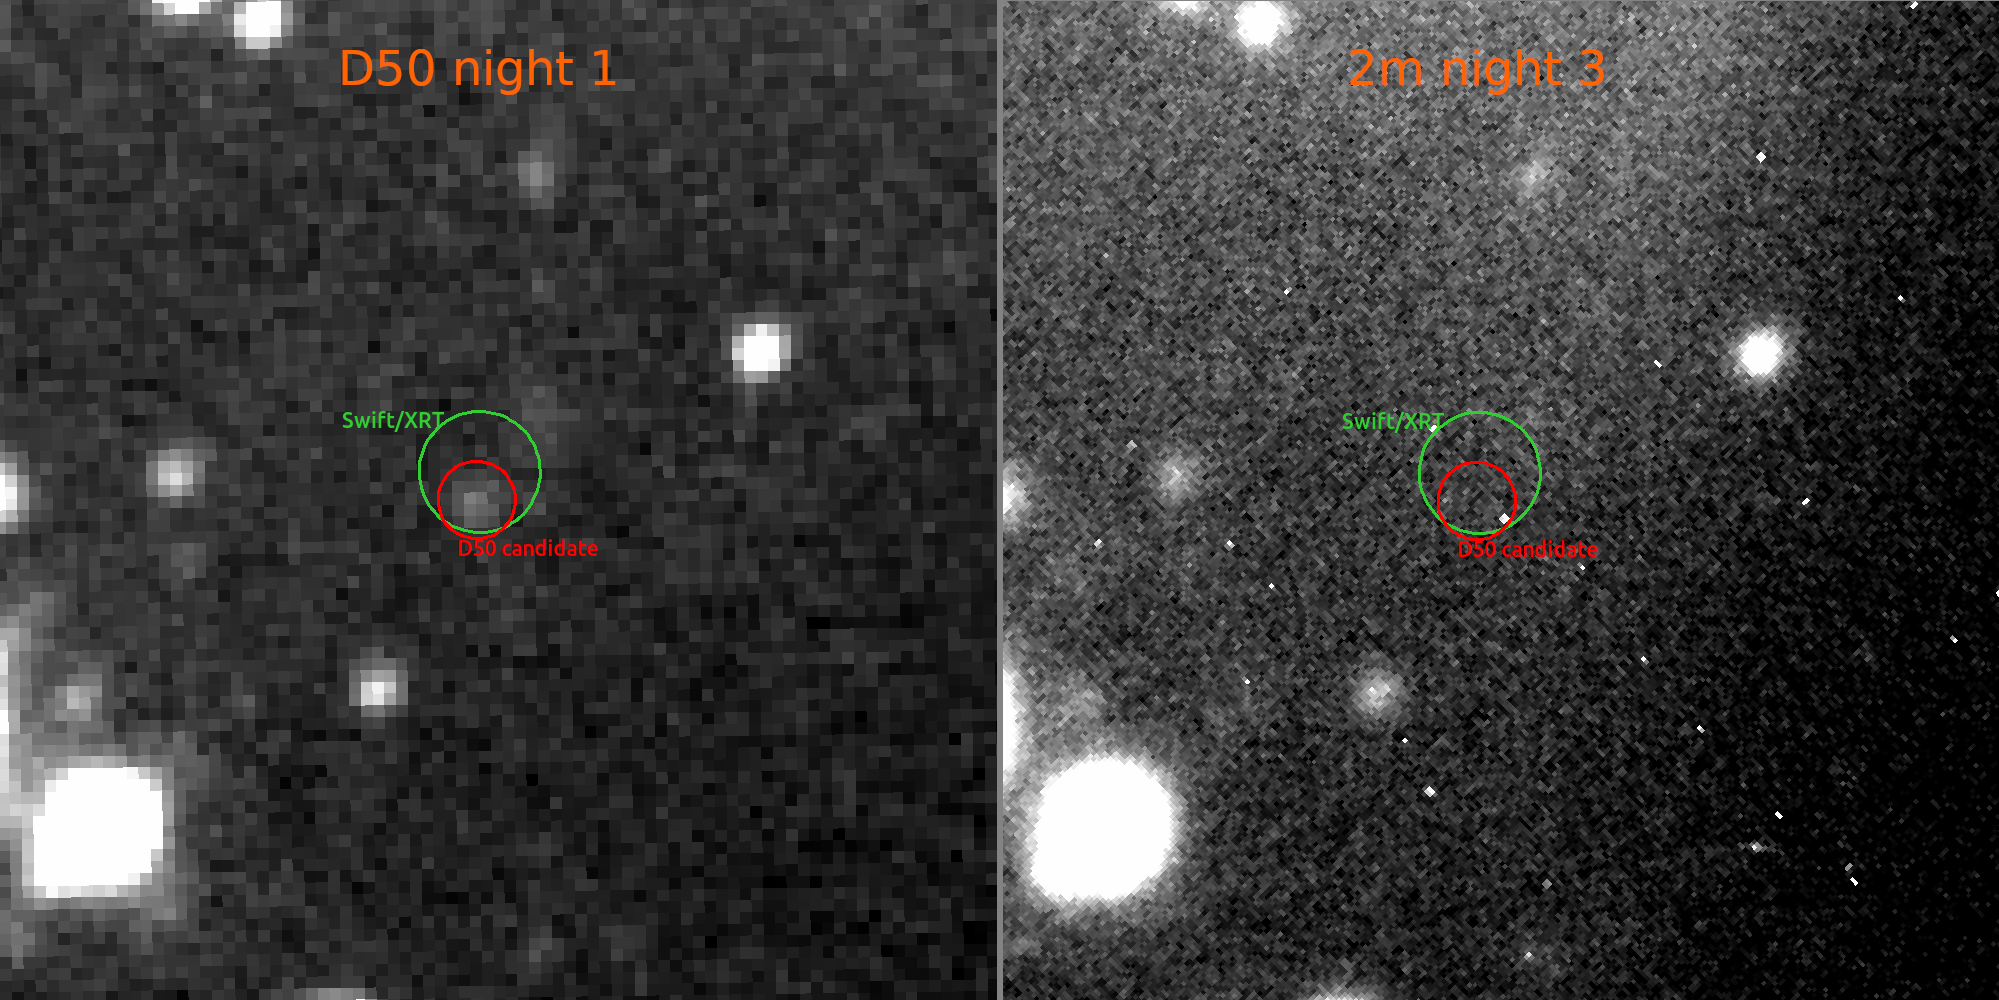 Image from the 2m telescope